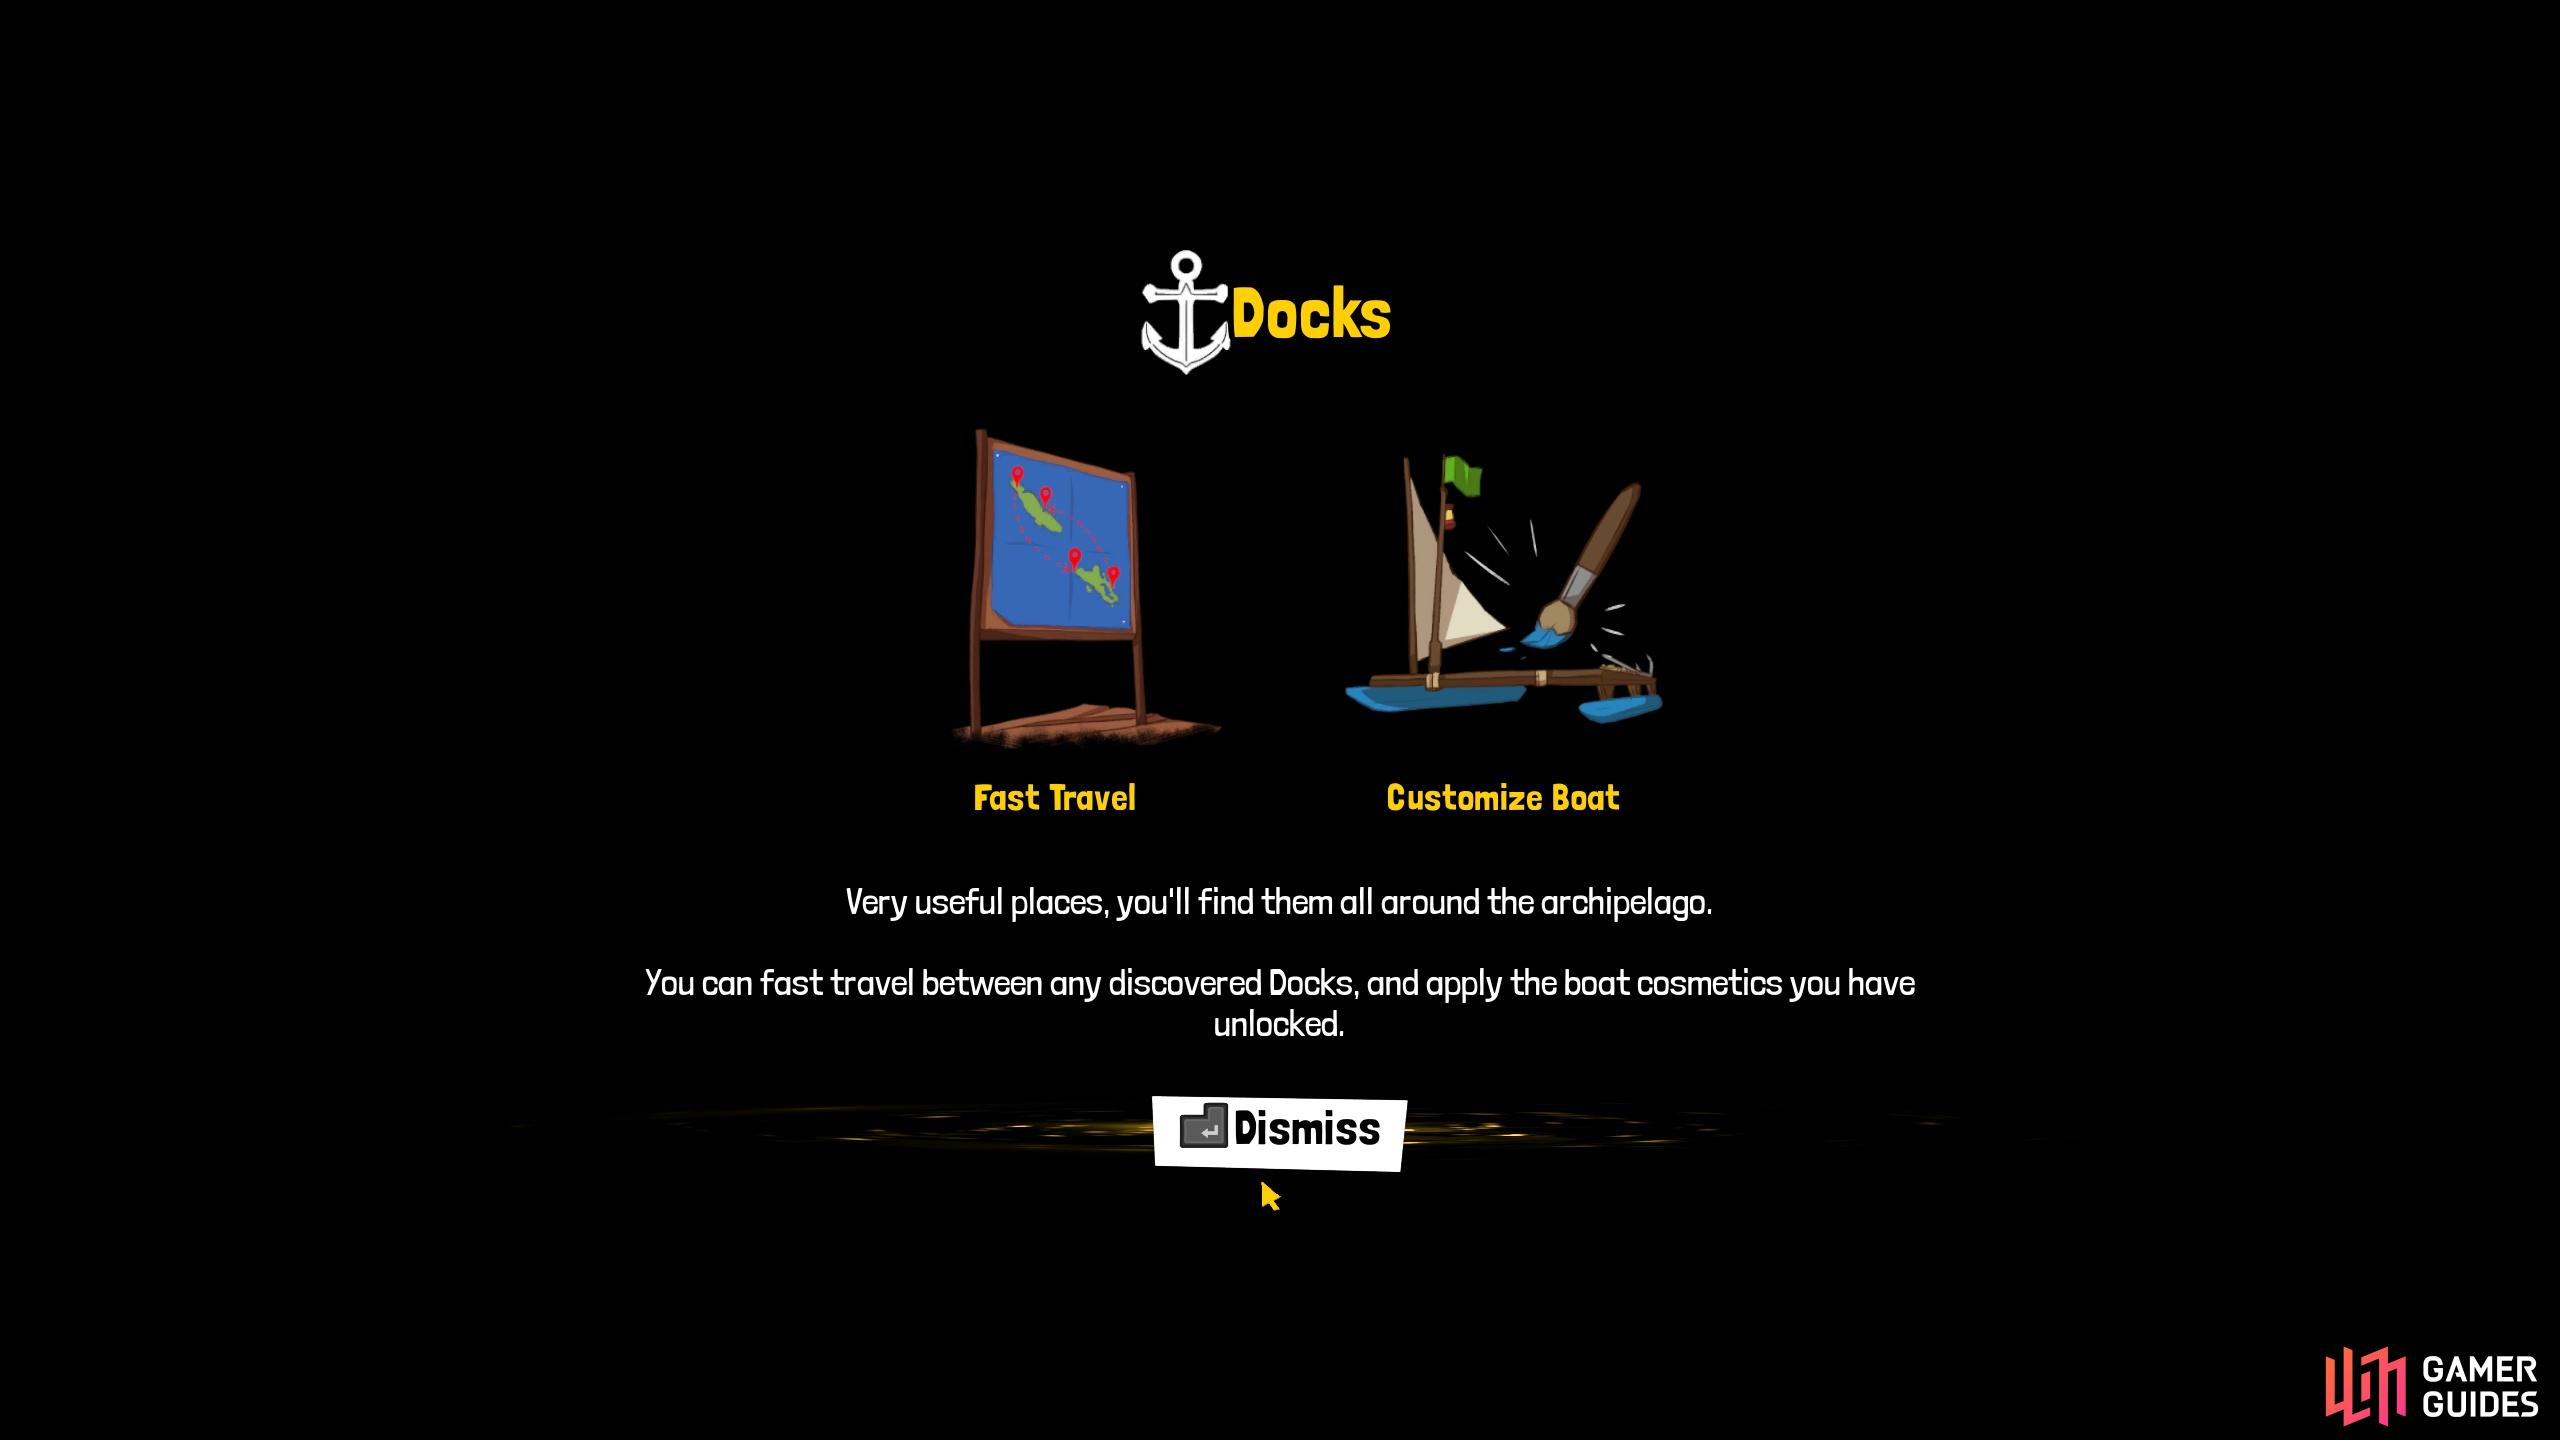 Use docks to customize your boat as well as fast travel!